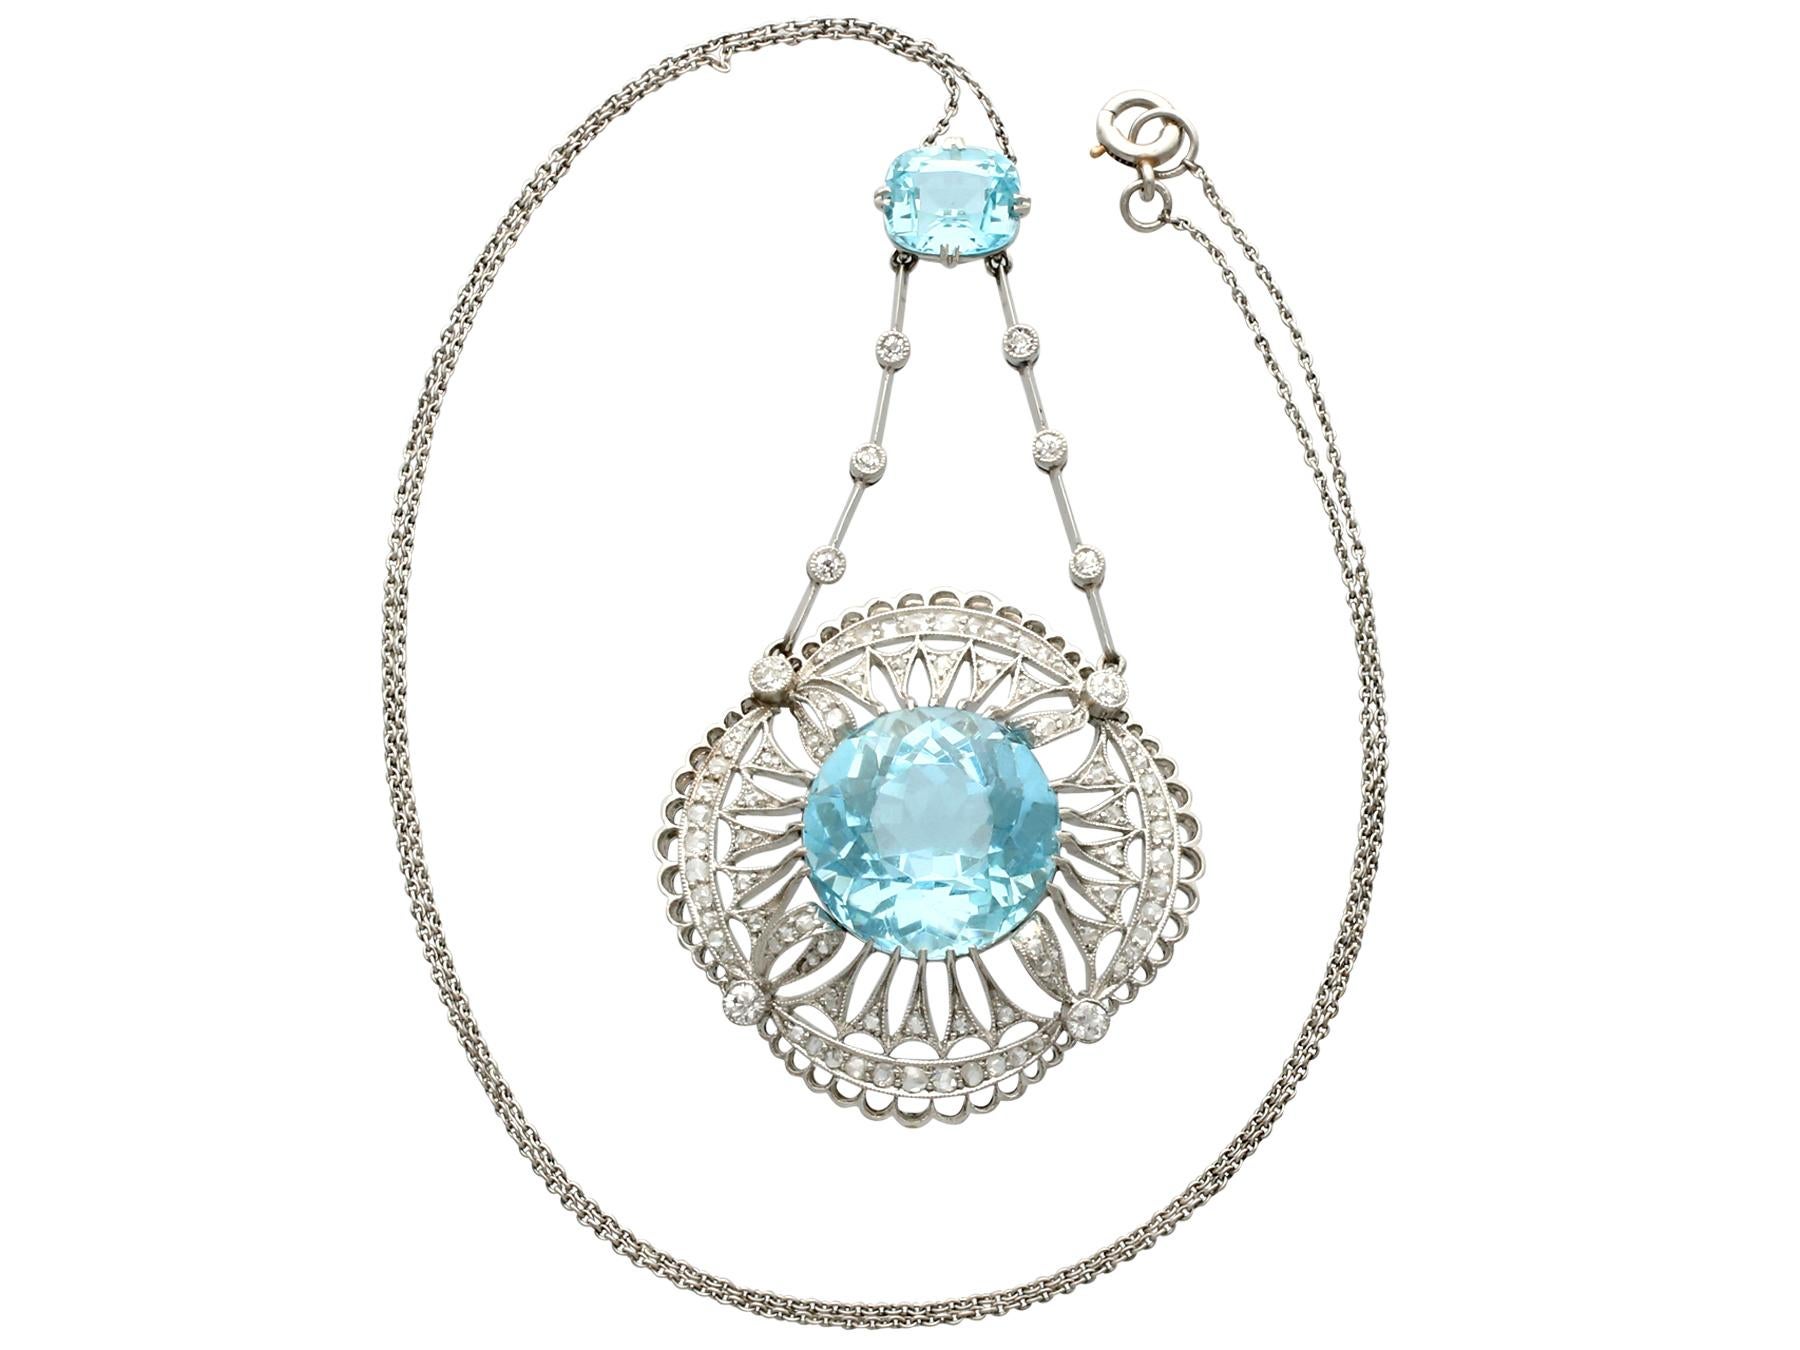 A stunning antique 10.97 carat aquamarine and 1.57 carat topaz, 1.42 carat diamond and platinum necklace; part of our diverse antique jewelry and estate jewelry collections.

This stunning, fine and impressive antique pendant has been crafted in